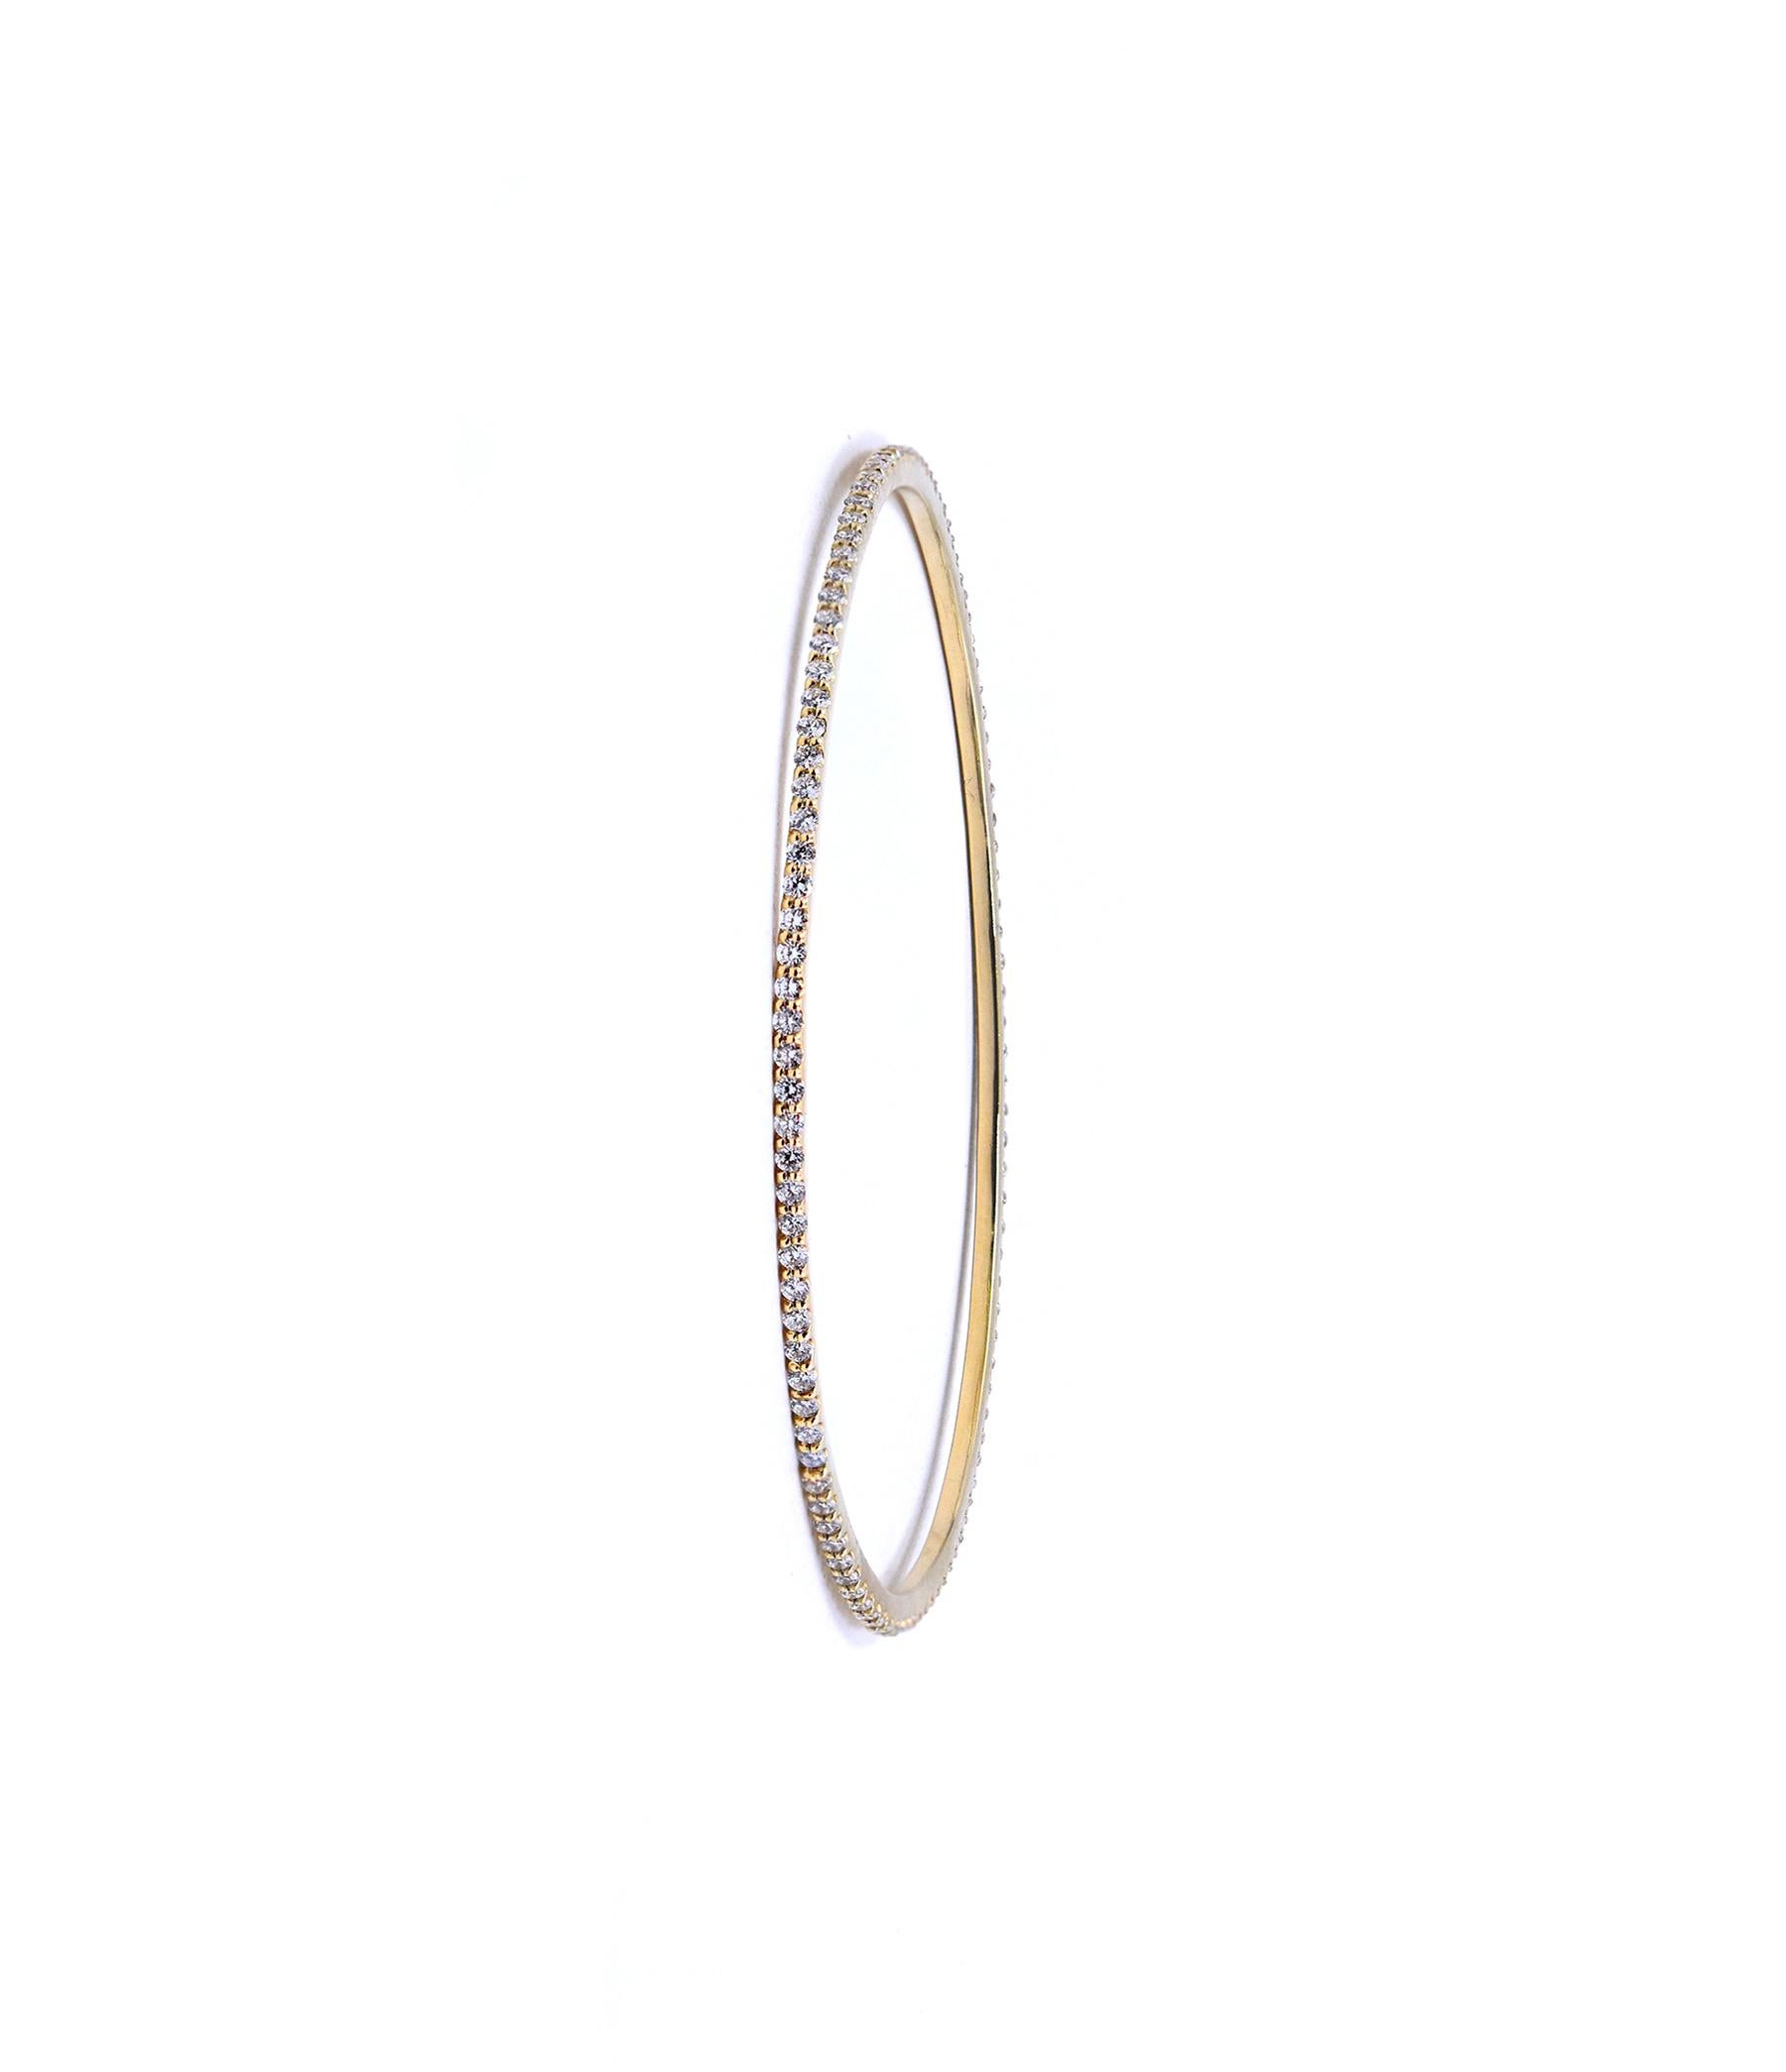 Designer: custom designed 
Material: 14K yellow gold
Diamonds: 90 round brilliant cut = 1.80cttw
Color: G
Clarity: VS1
Dimensions: bracelet will fit a 8-inch wrist 
Weight: 7.79 grams
